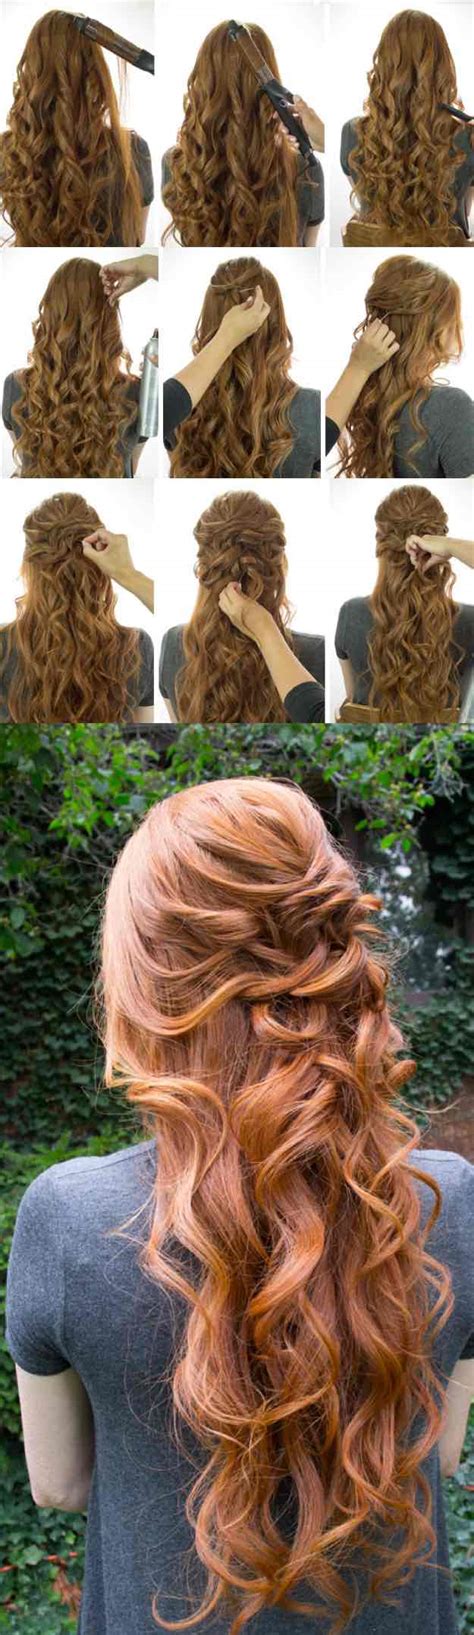 25 Easy Half Up Half Down Hairstyle Tutorials For Prom